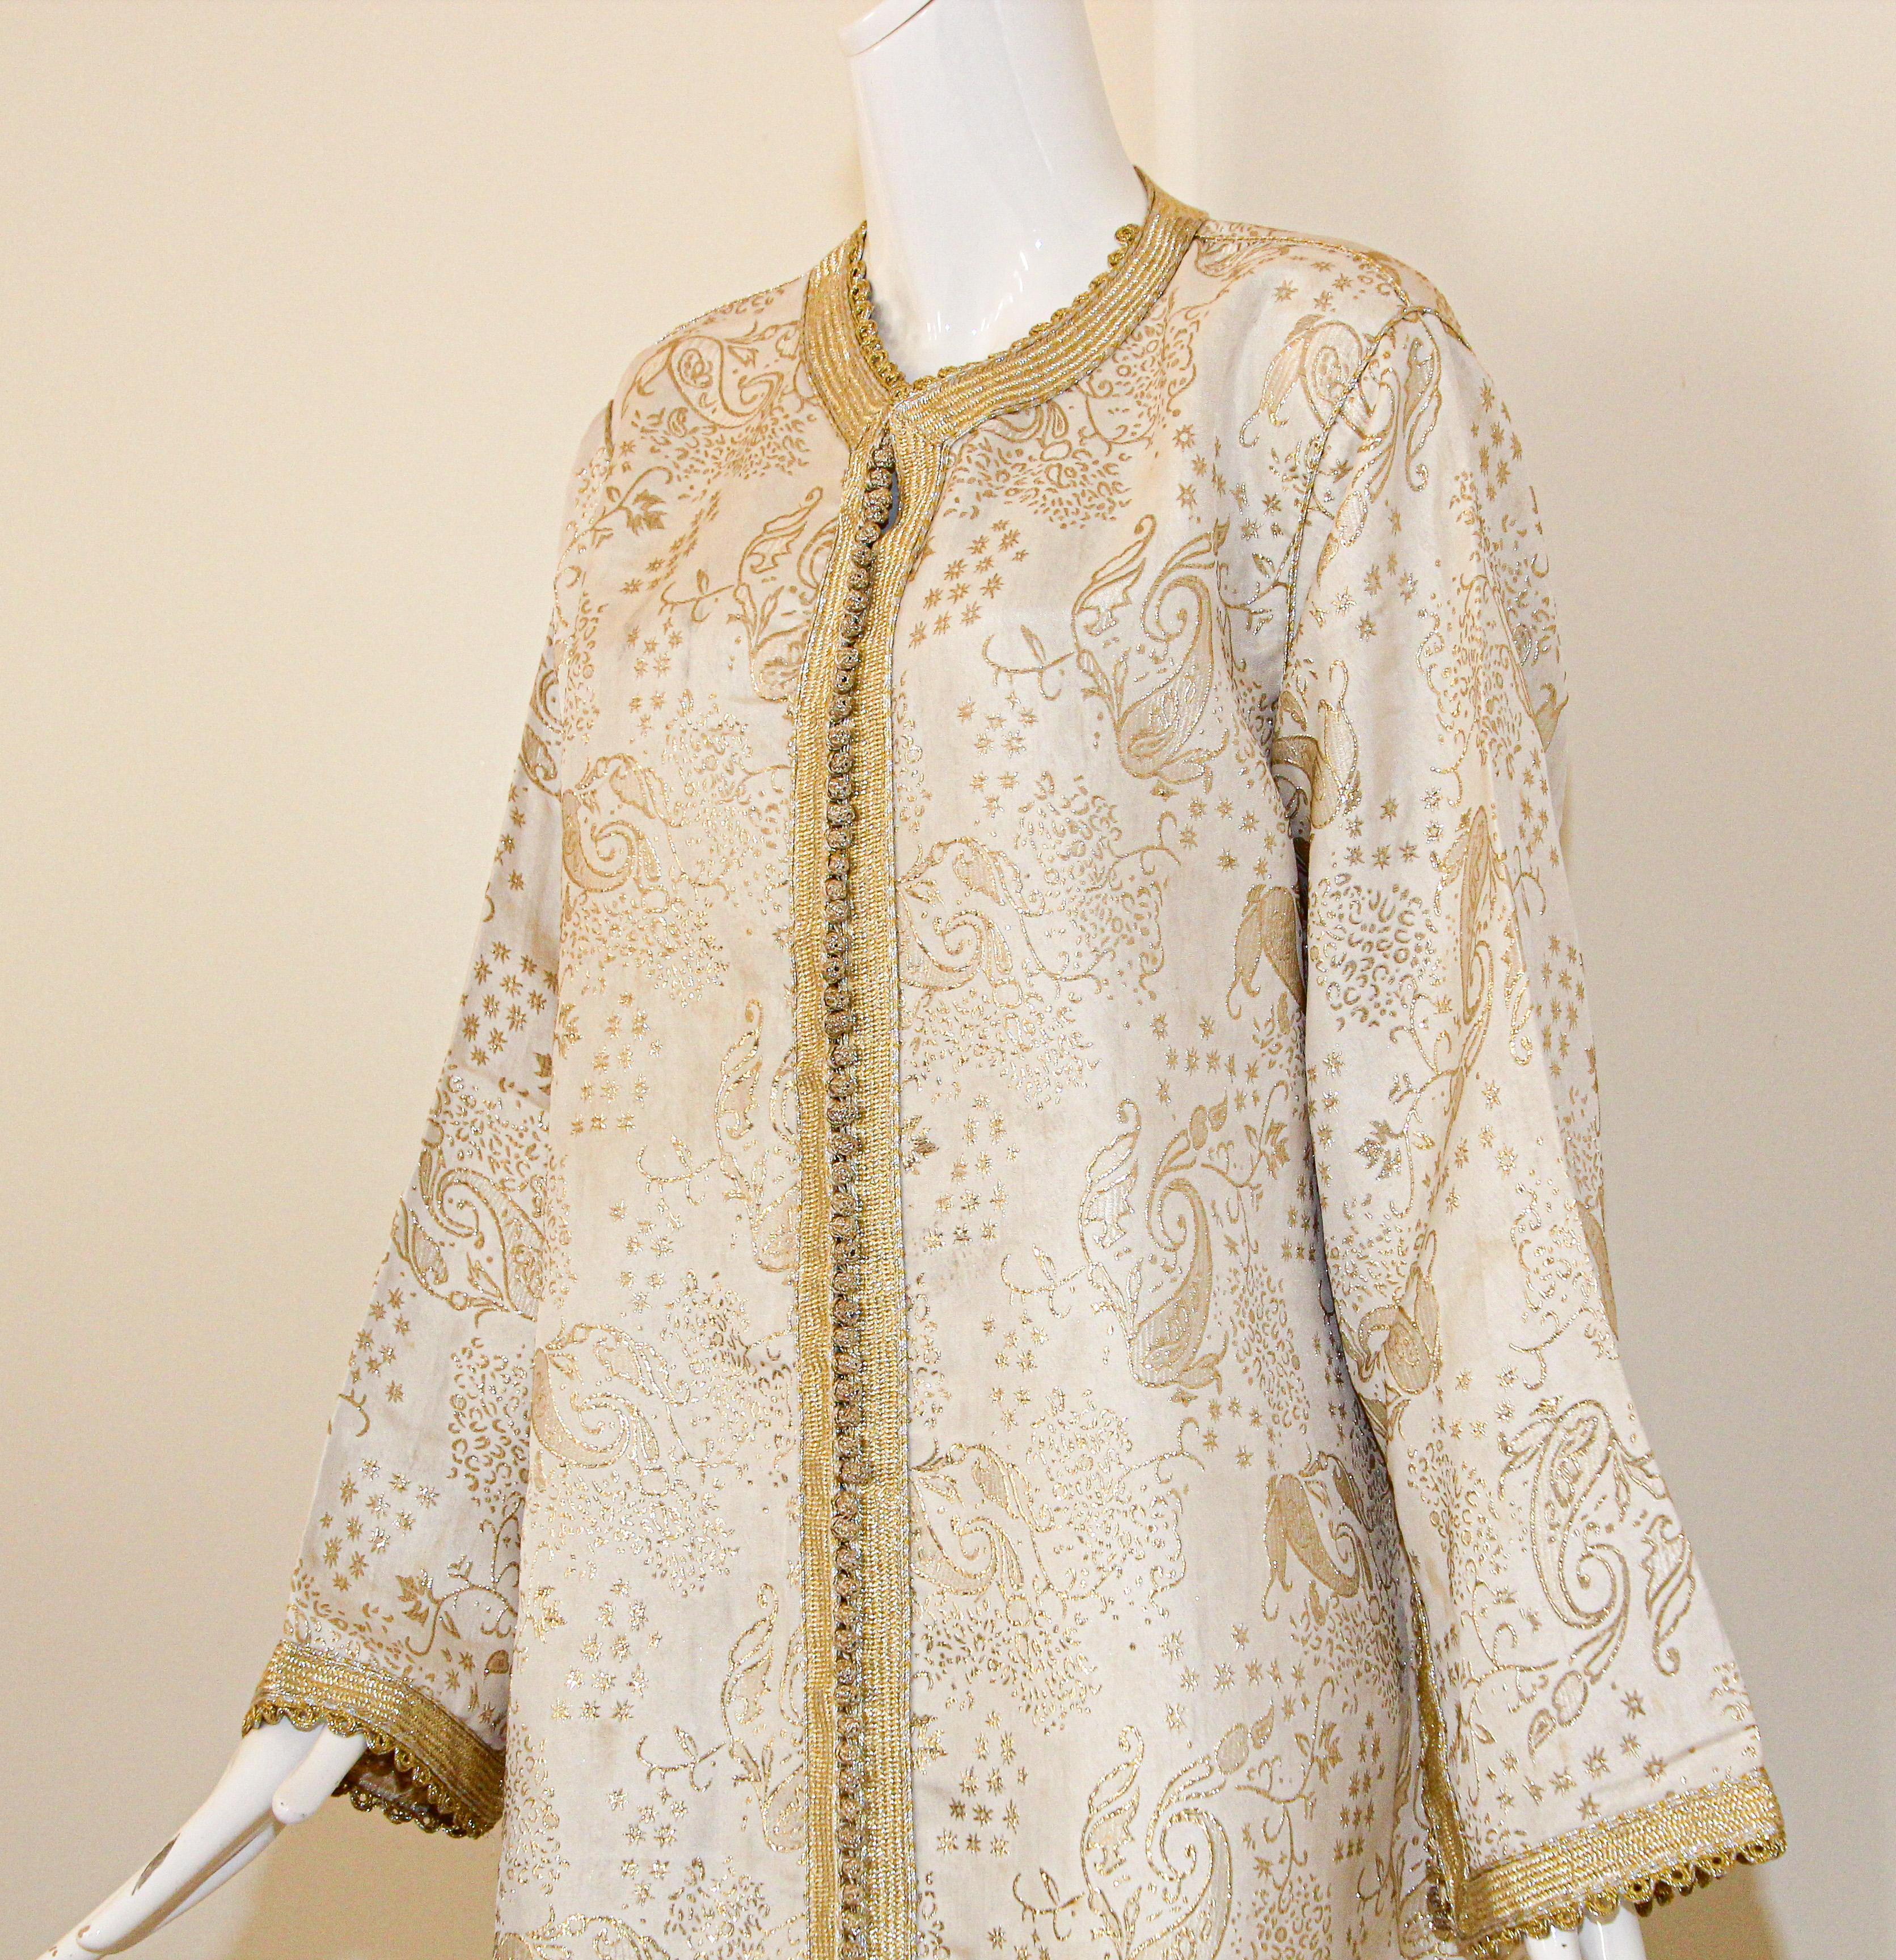 Elegant Moroccan White Caftan with Gold Metallic Floral Brocade For Sale 6